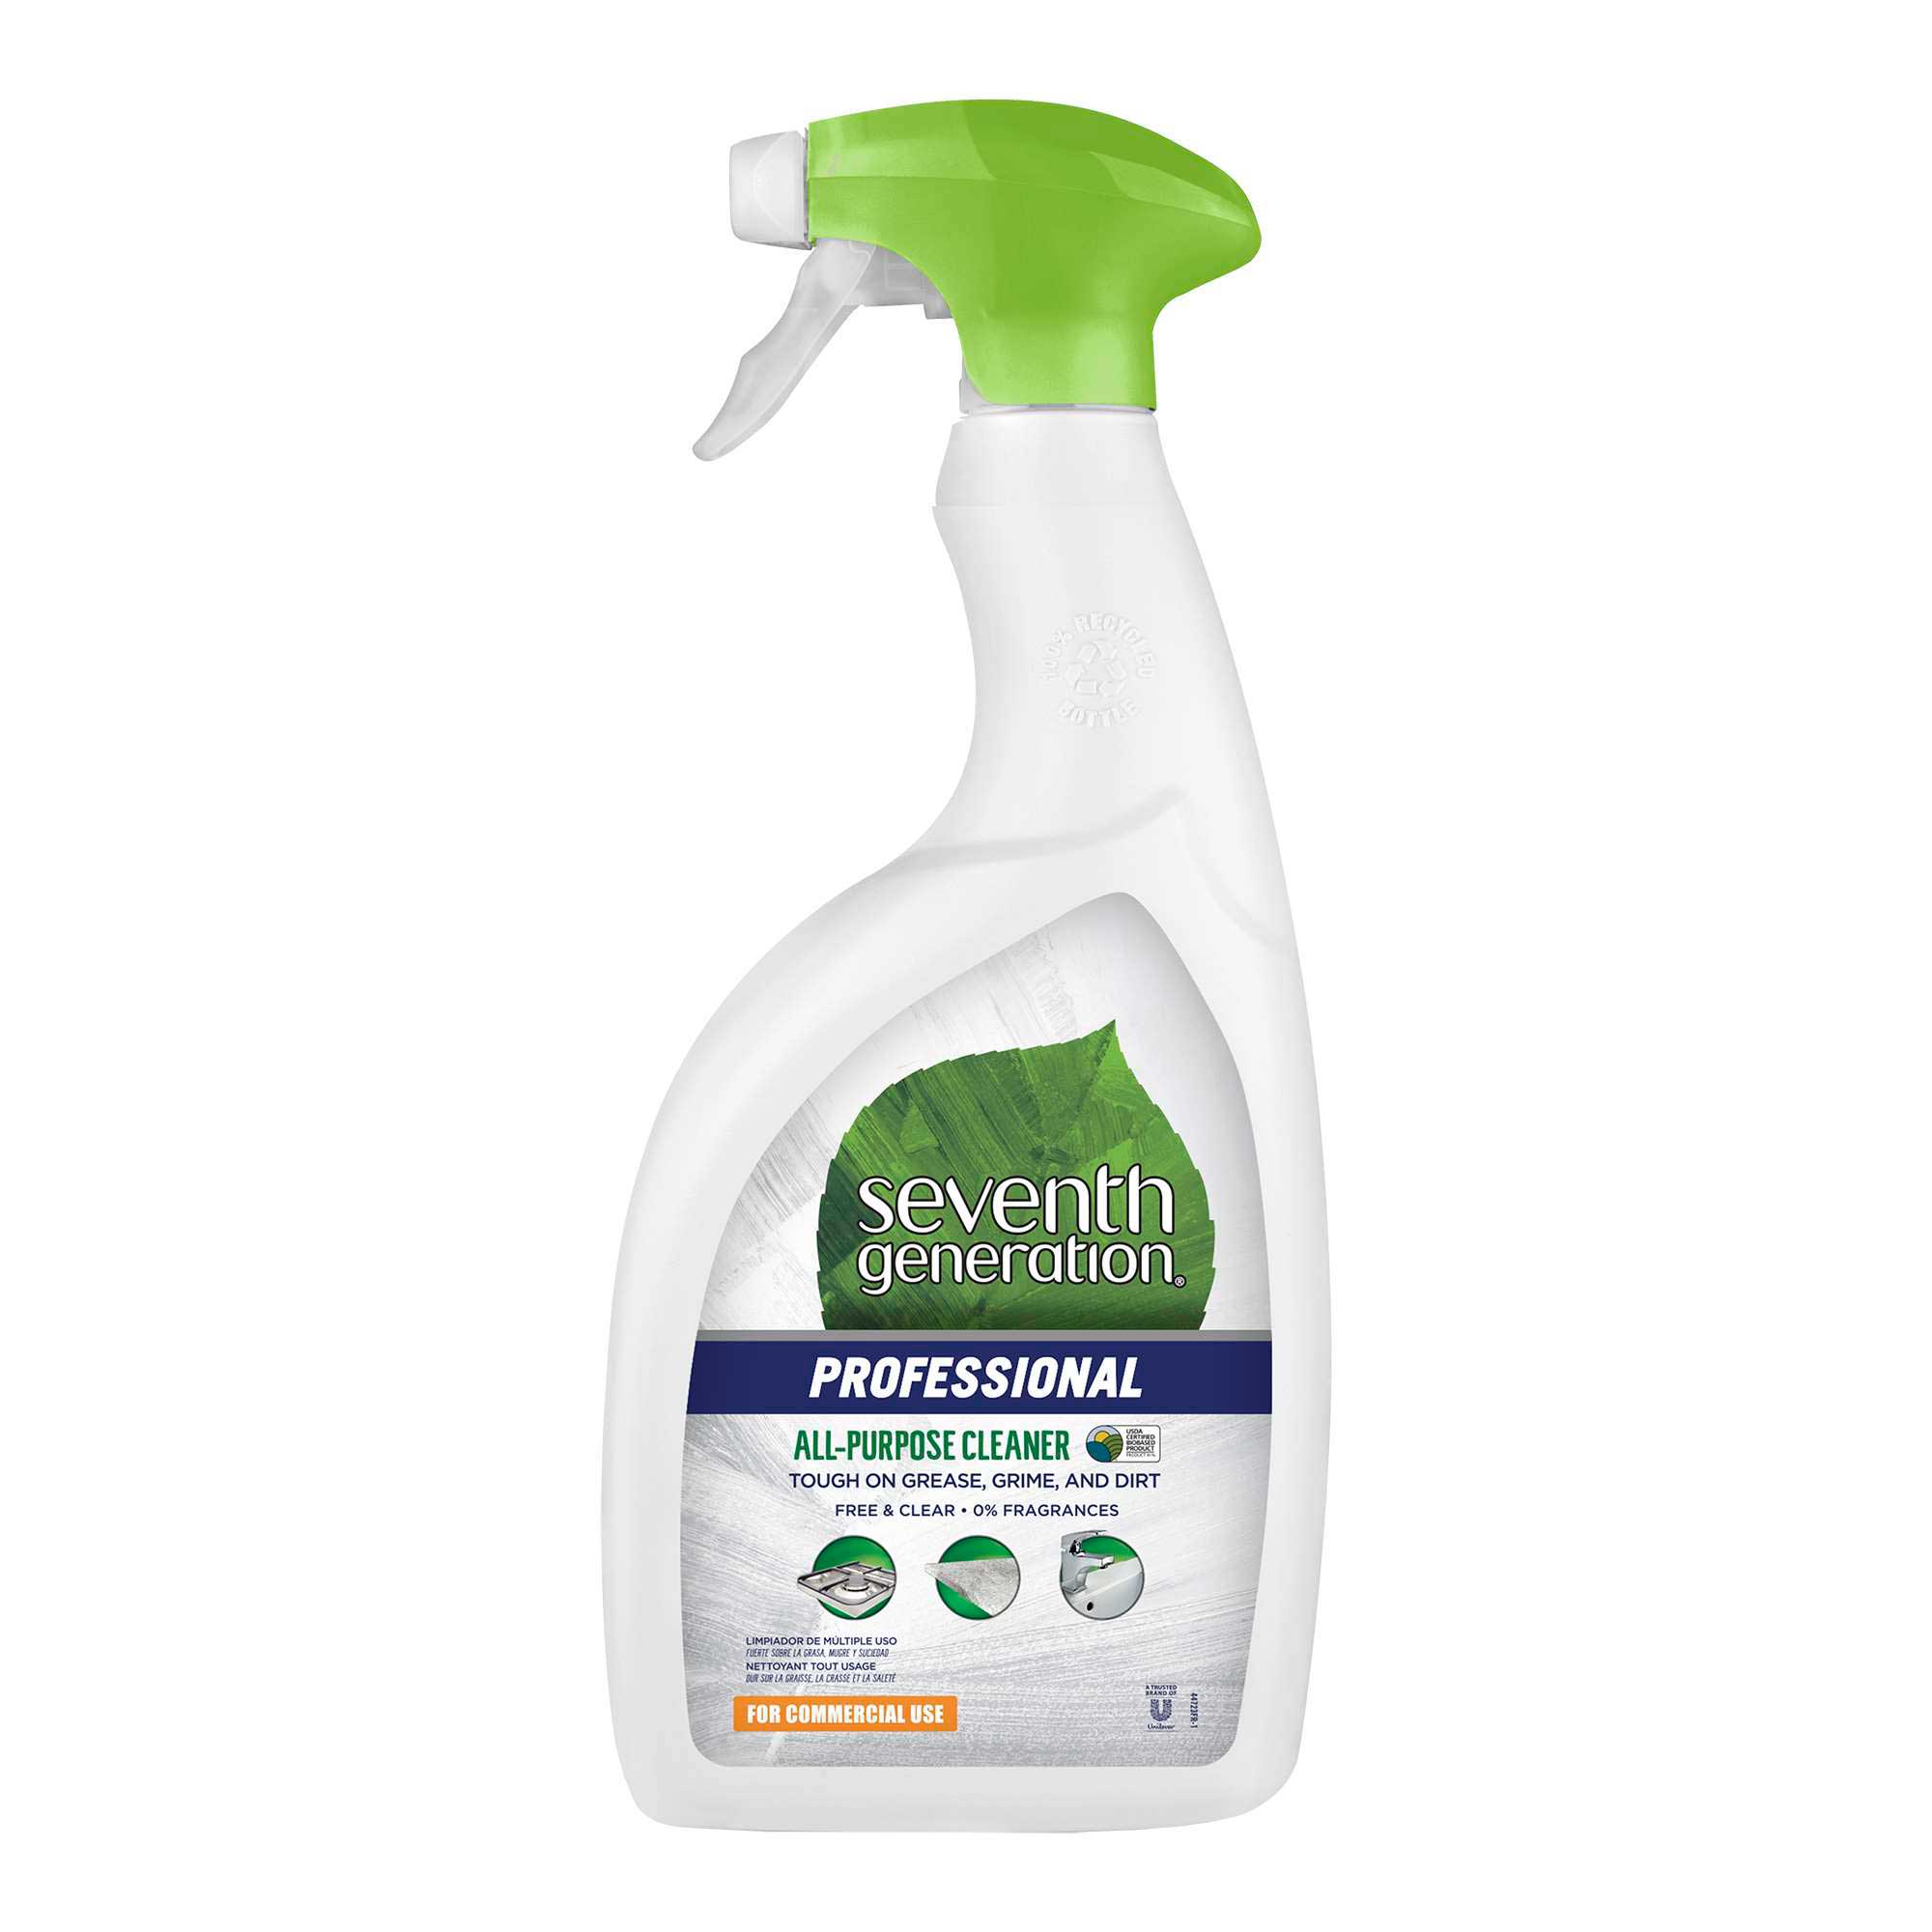 Seventh Generation Professional All Purpose Cleaner, 32 Fluid Ounce -- 4 per case